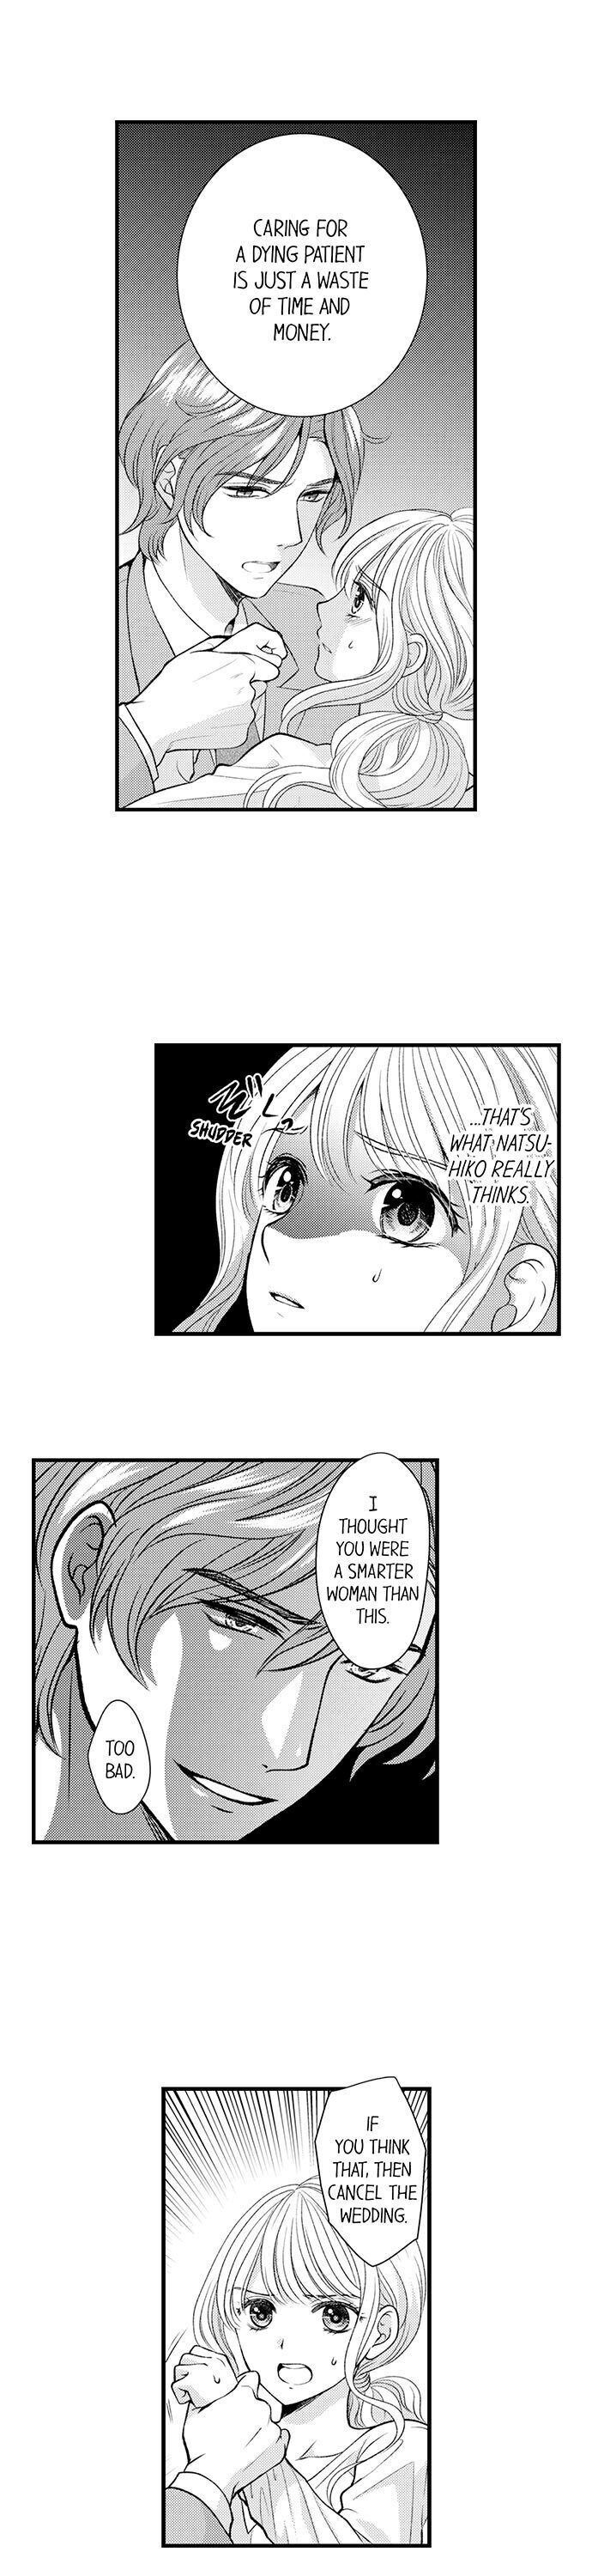 Cheating in a One-Sided Relationship - Chapter 13 Page 10